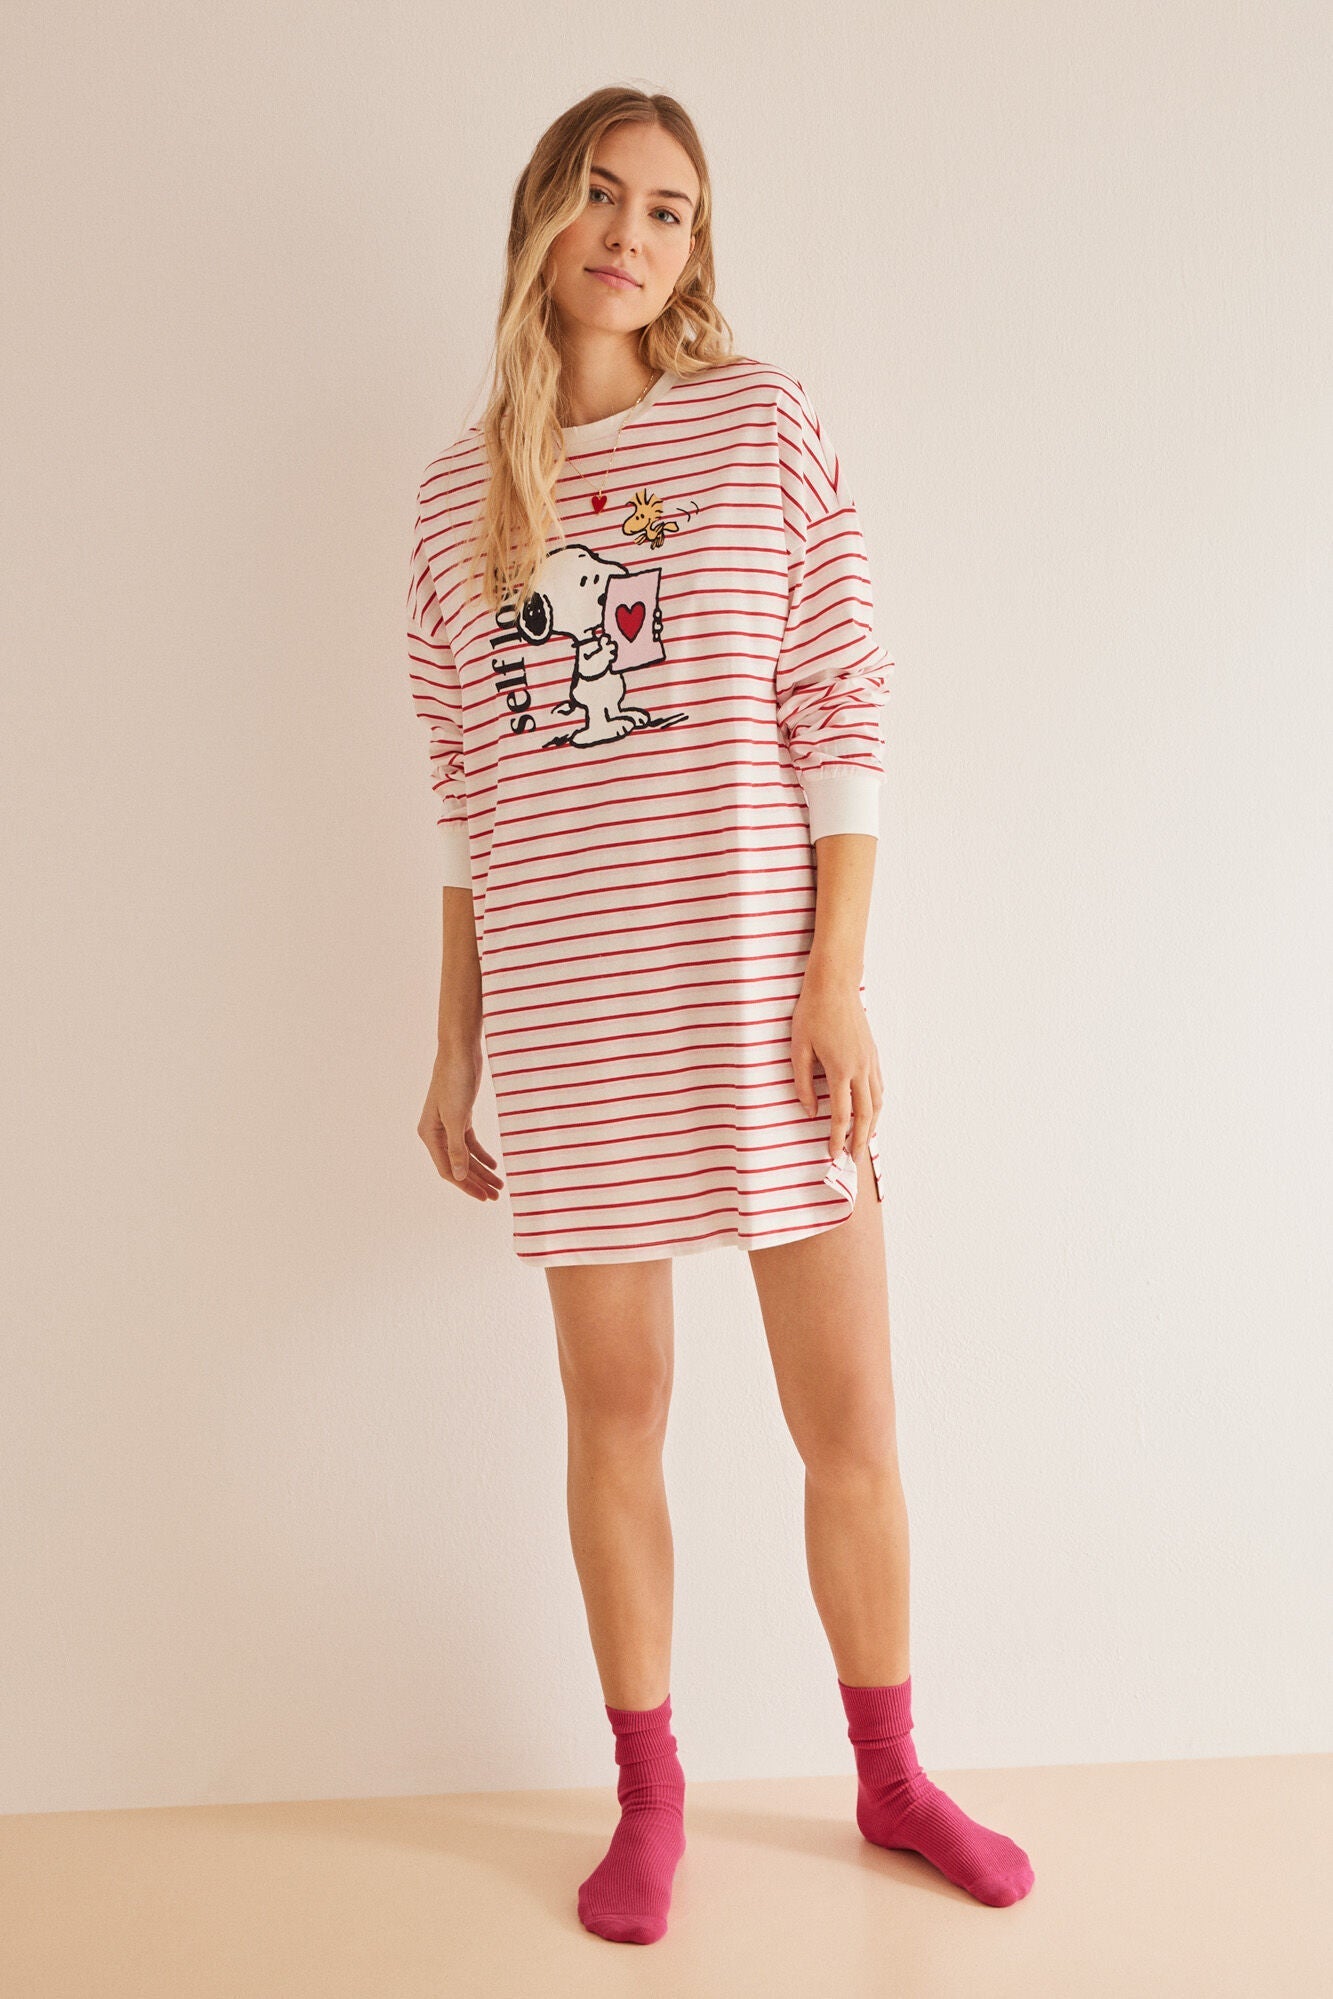 Snoopy striped nightgown